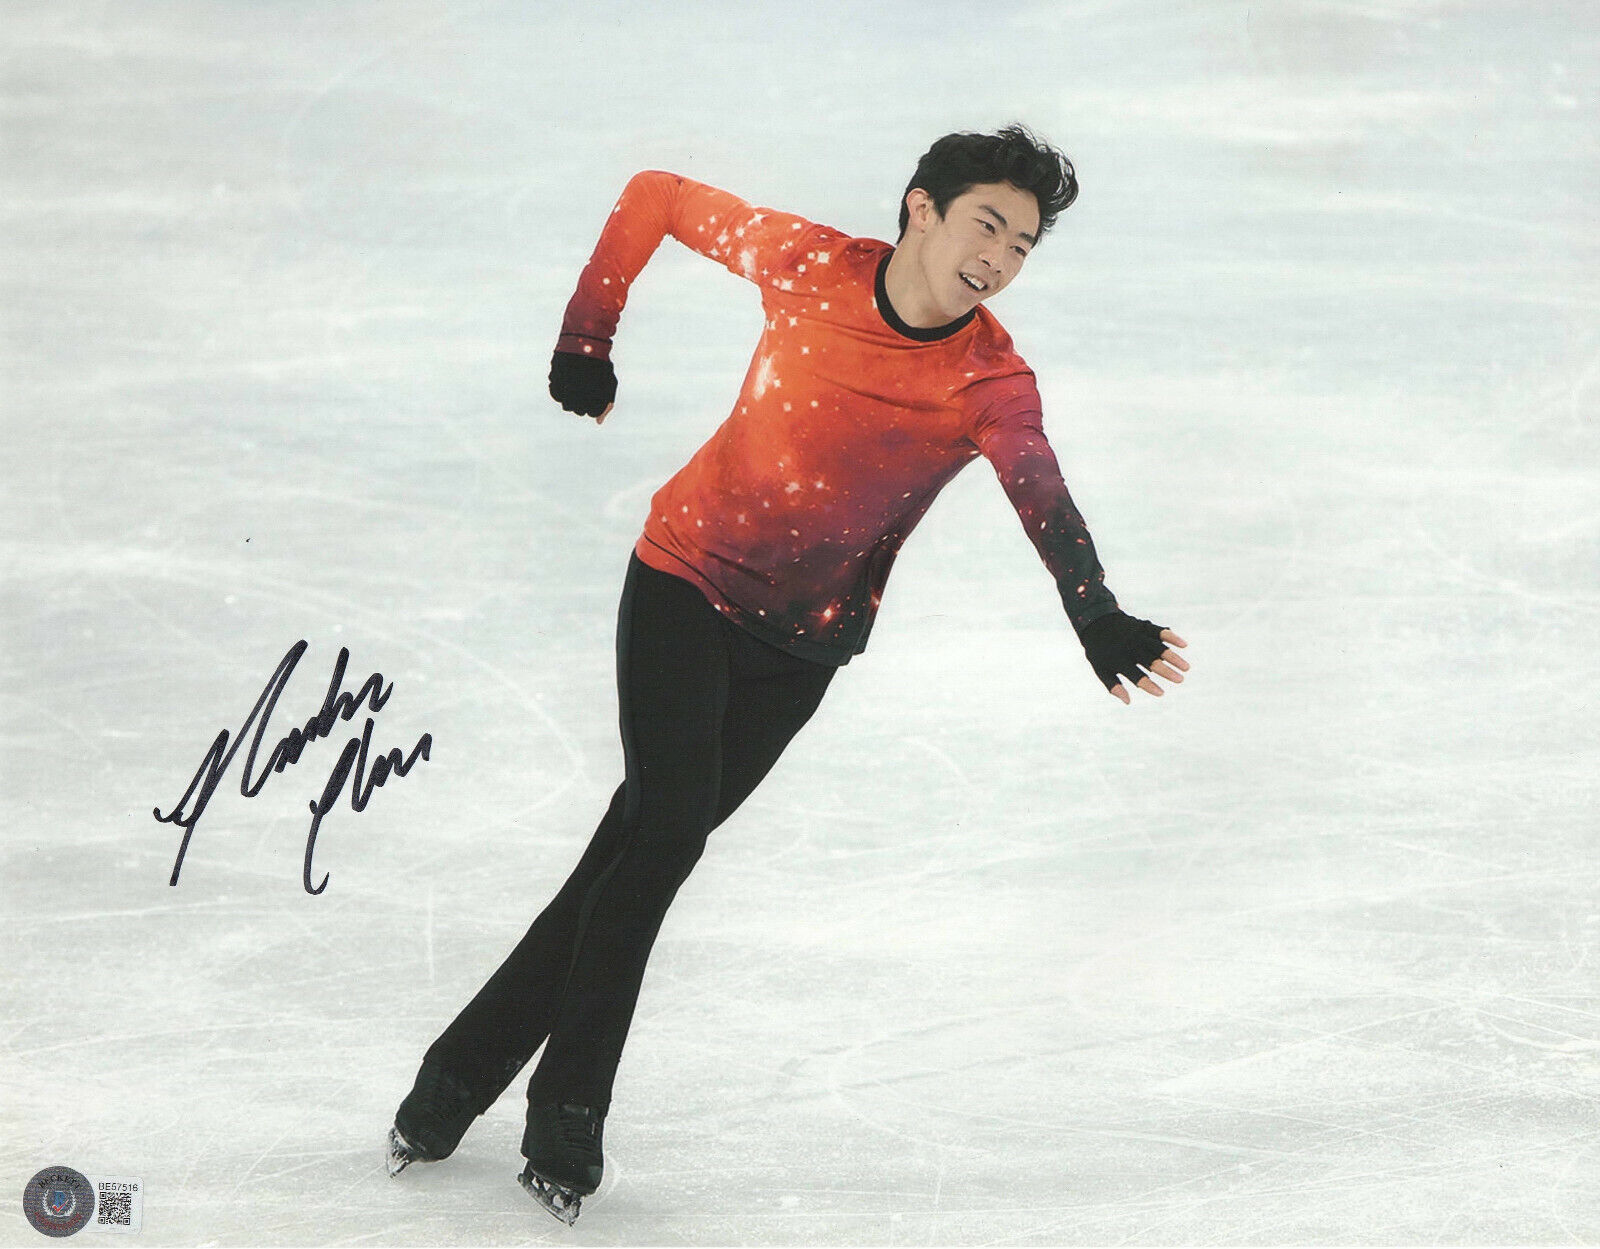 USA OLYMPIC FIGURE SKATER NATHAN CHEN SIGNED AUTOGRAPH 11x14 PHOTO BAS BECKETT 